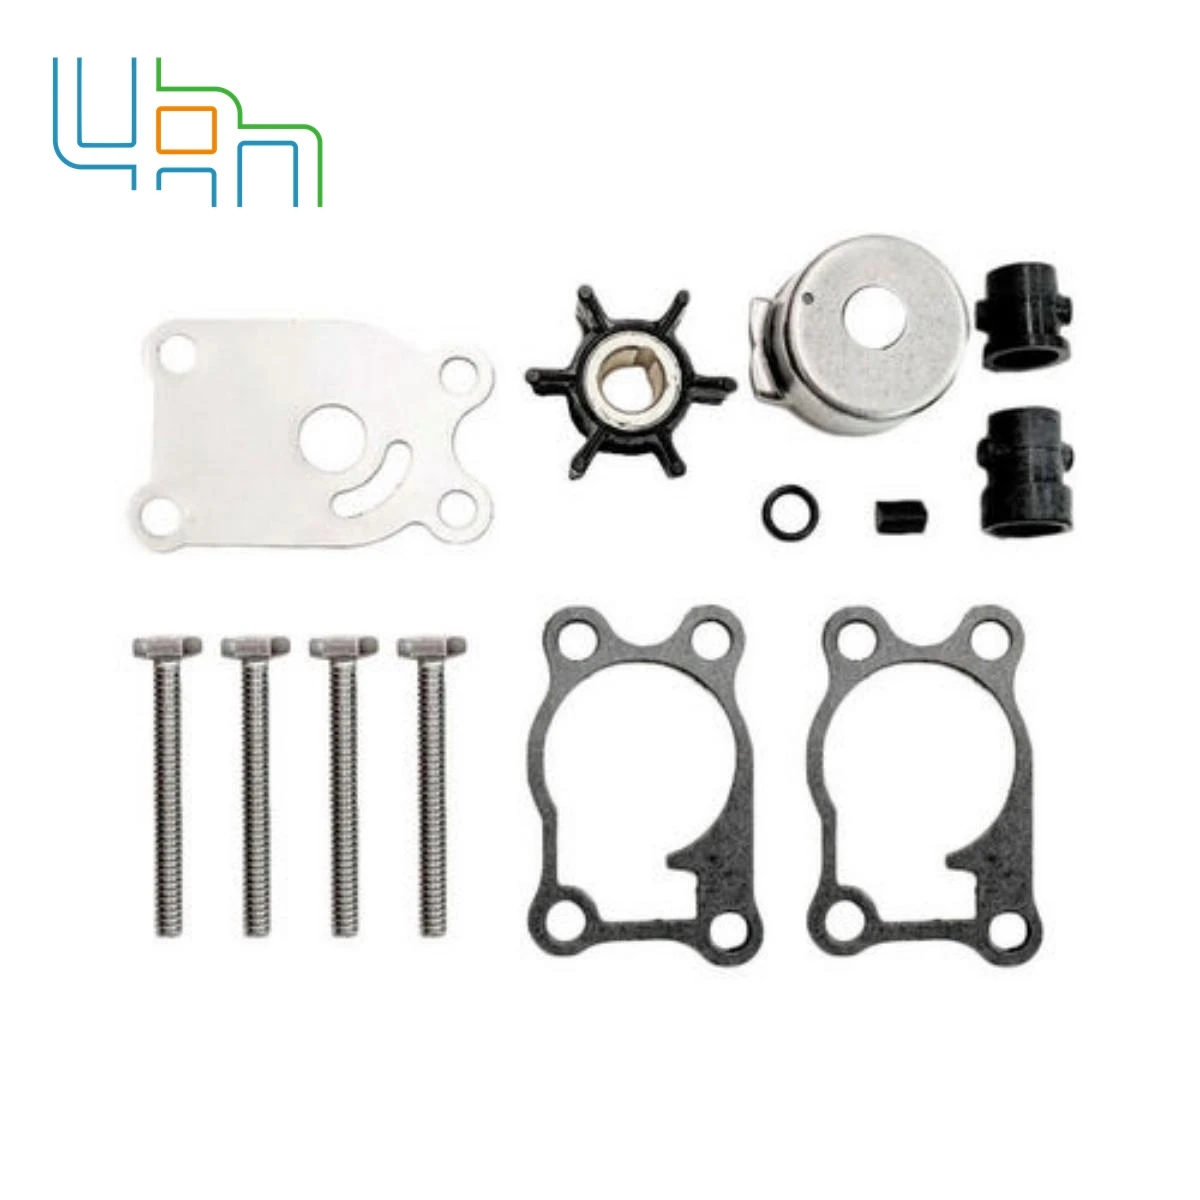 

396644 Water Pump Impeller Kit For Johnson Evinrude OMC 4 4.5 5 6 7.5 8 HP 1980-2005 Outboard 389844 0396644 396644 18-4529